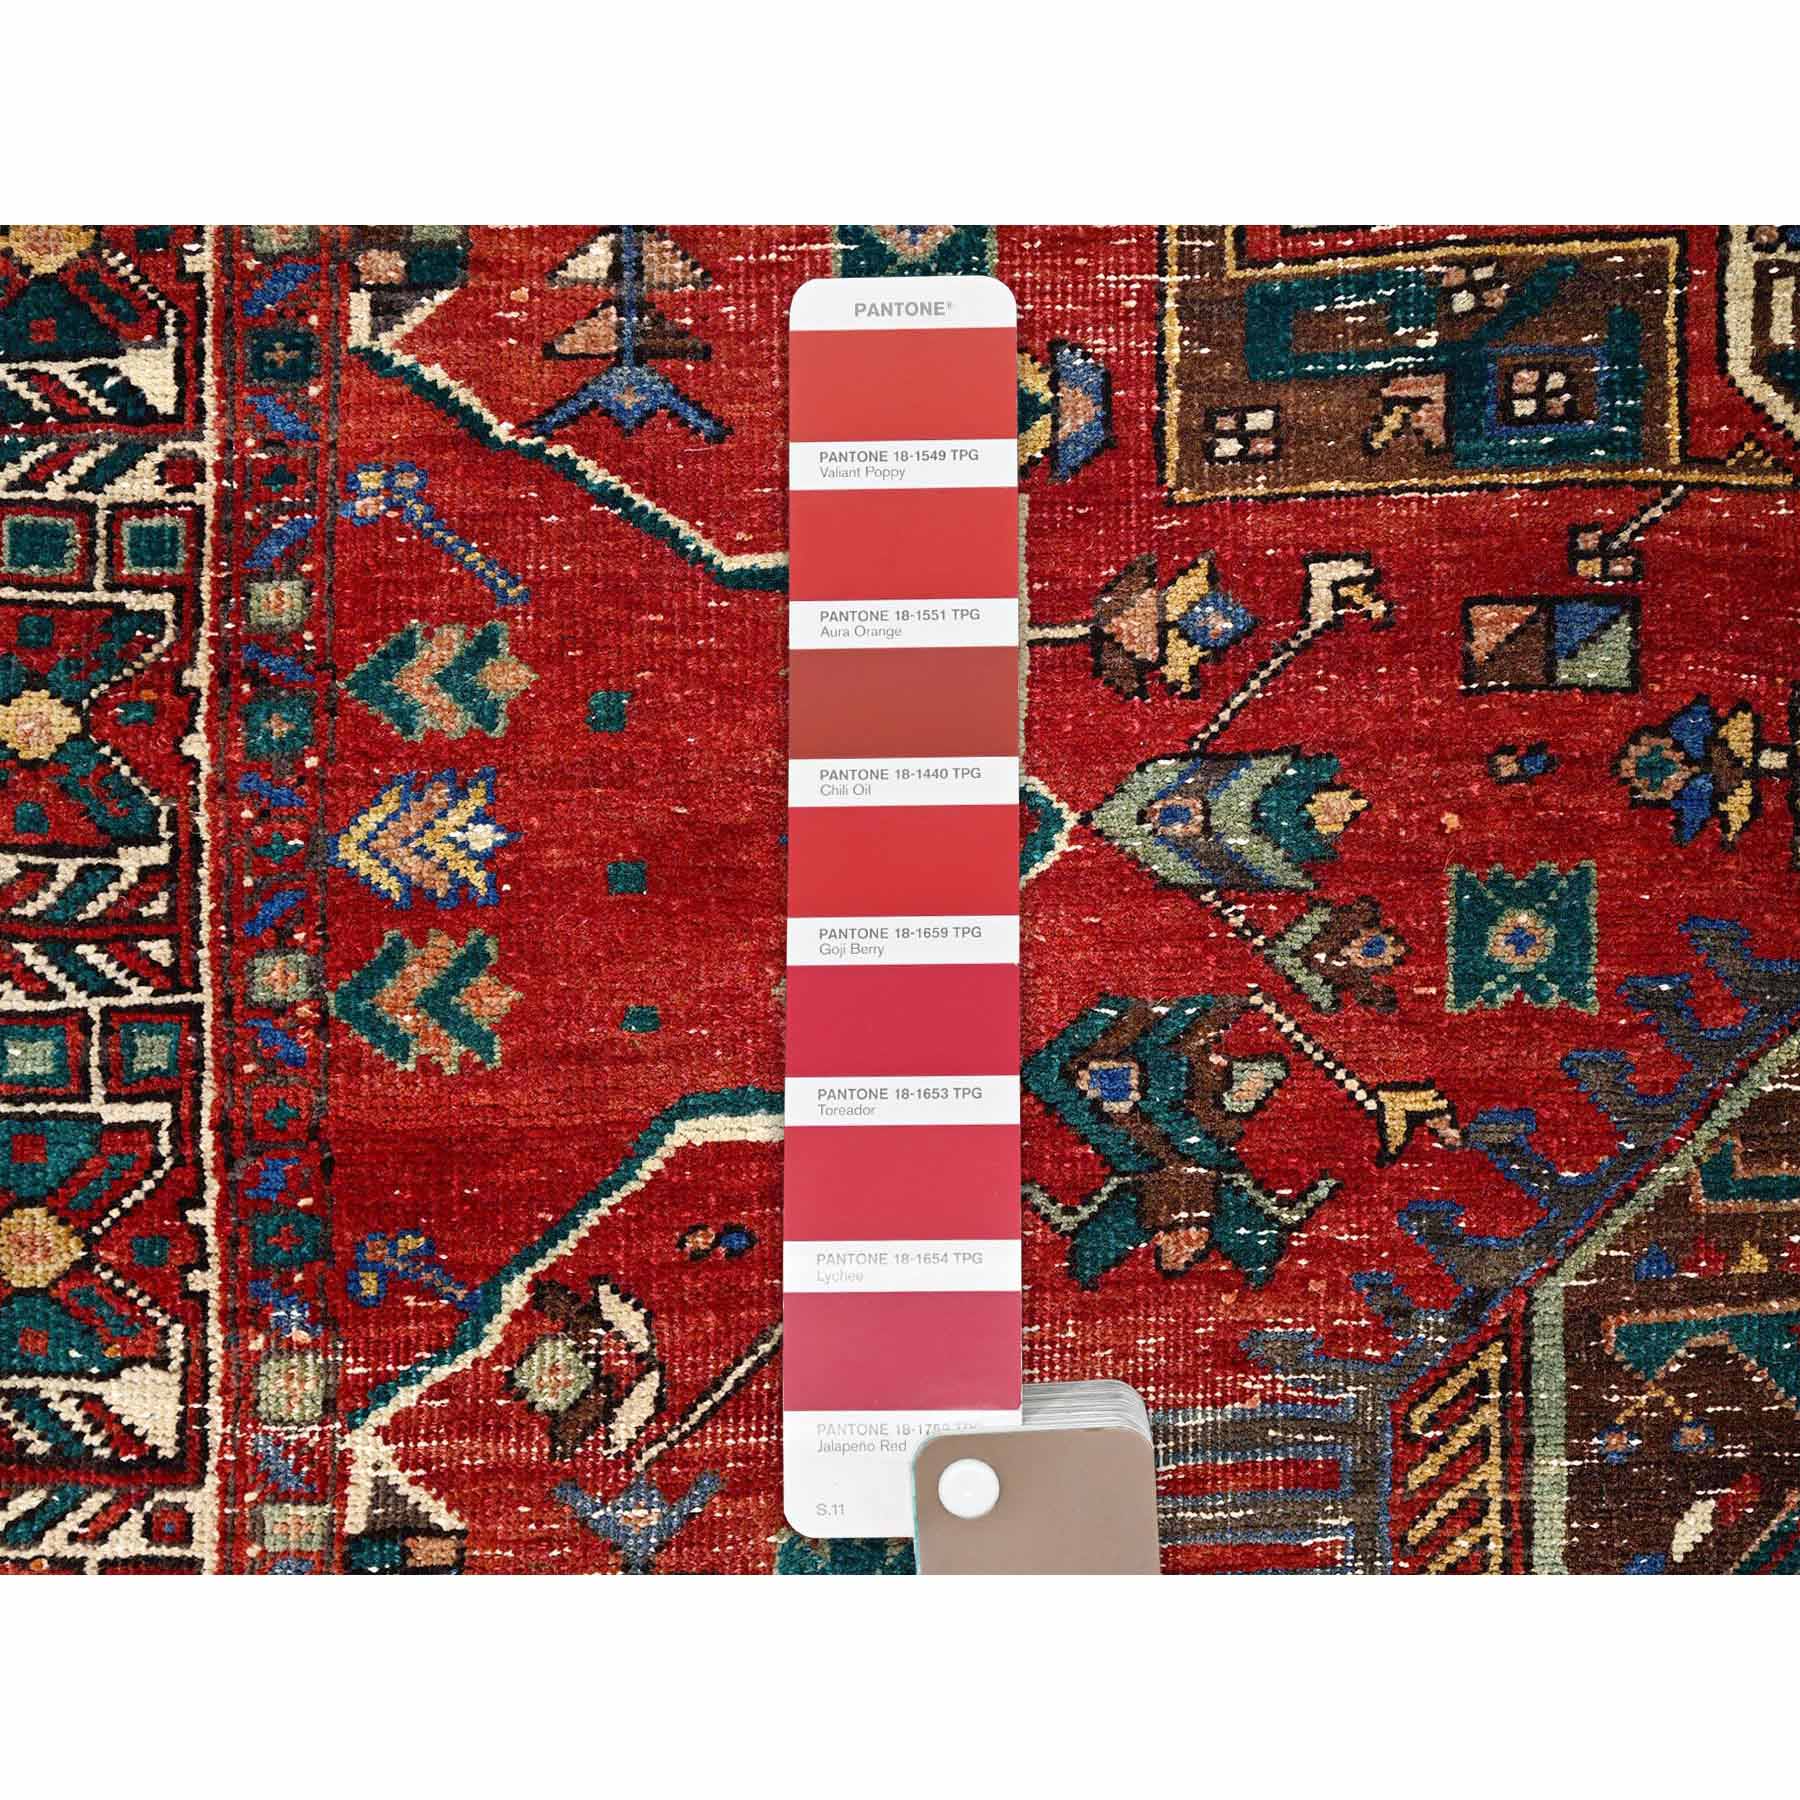 Overdyed-Vintage-Hand-Knotted-Rug-429855